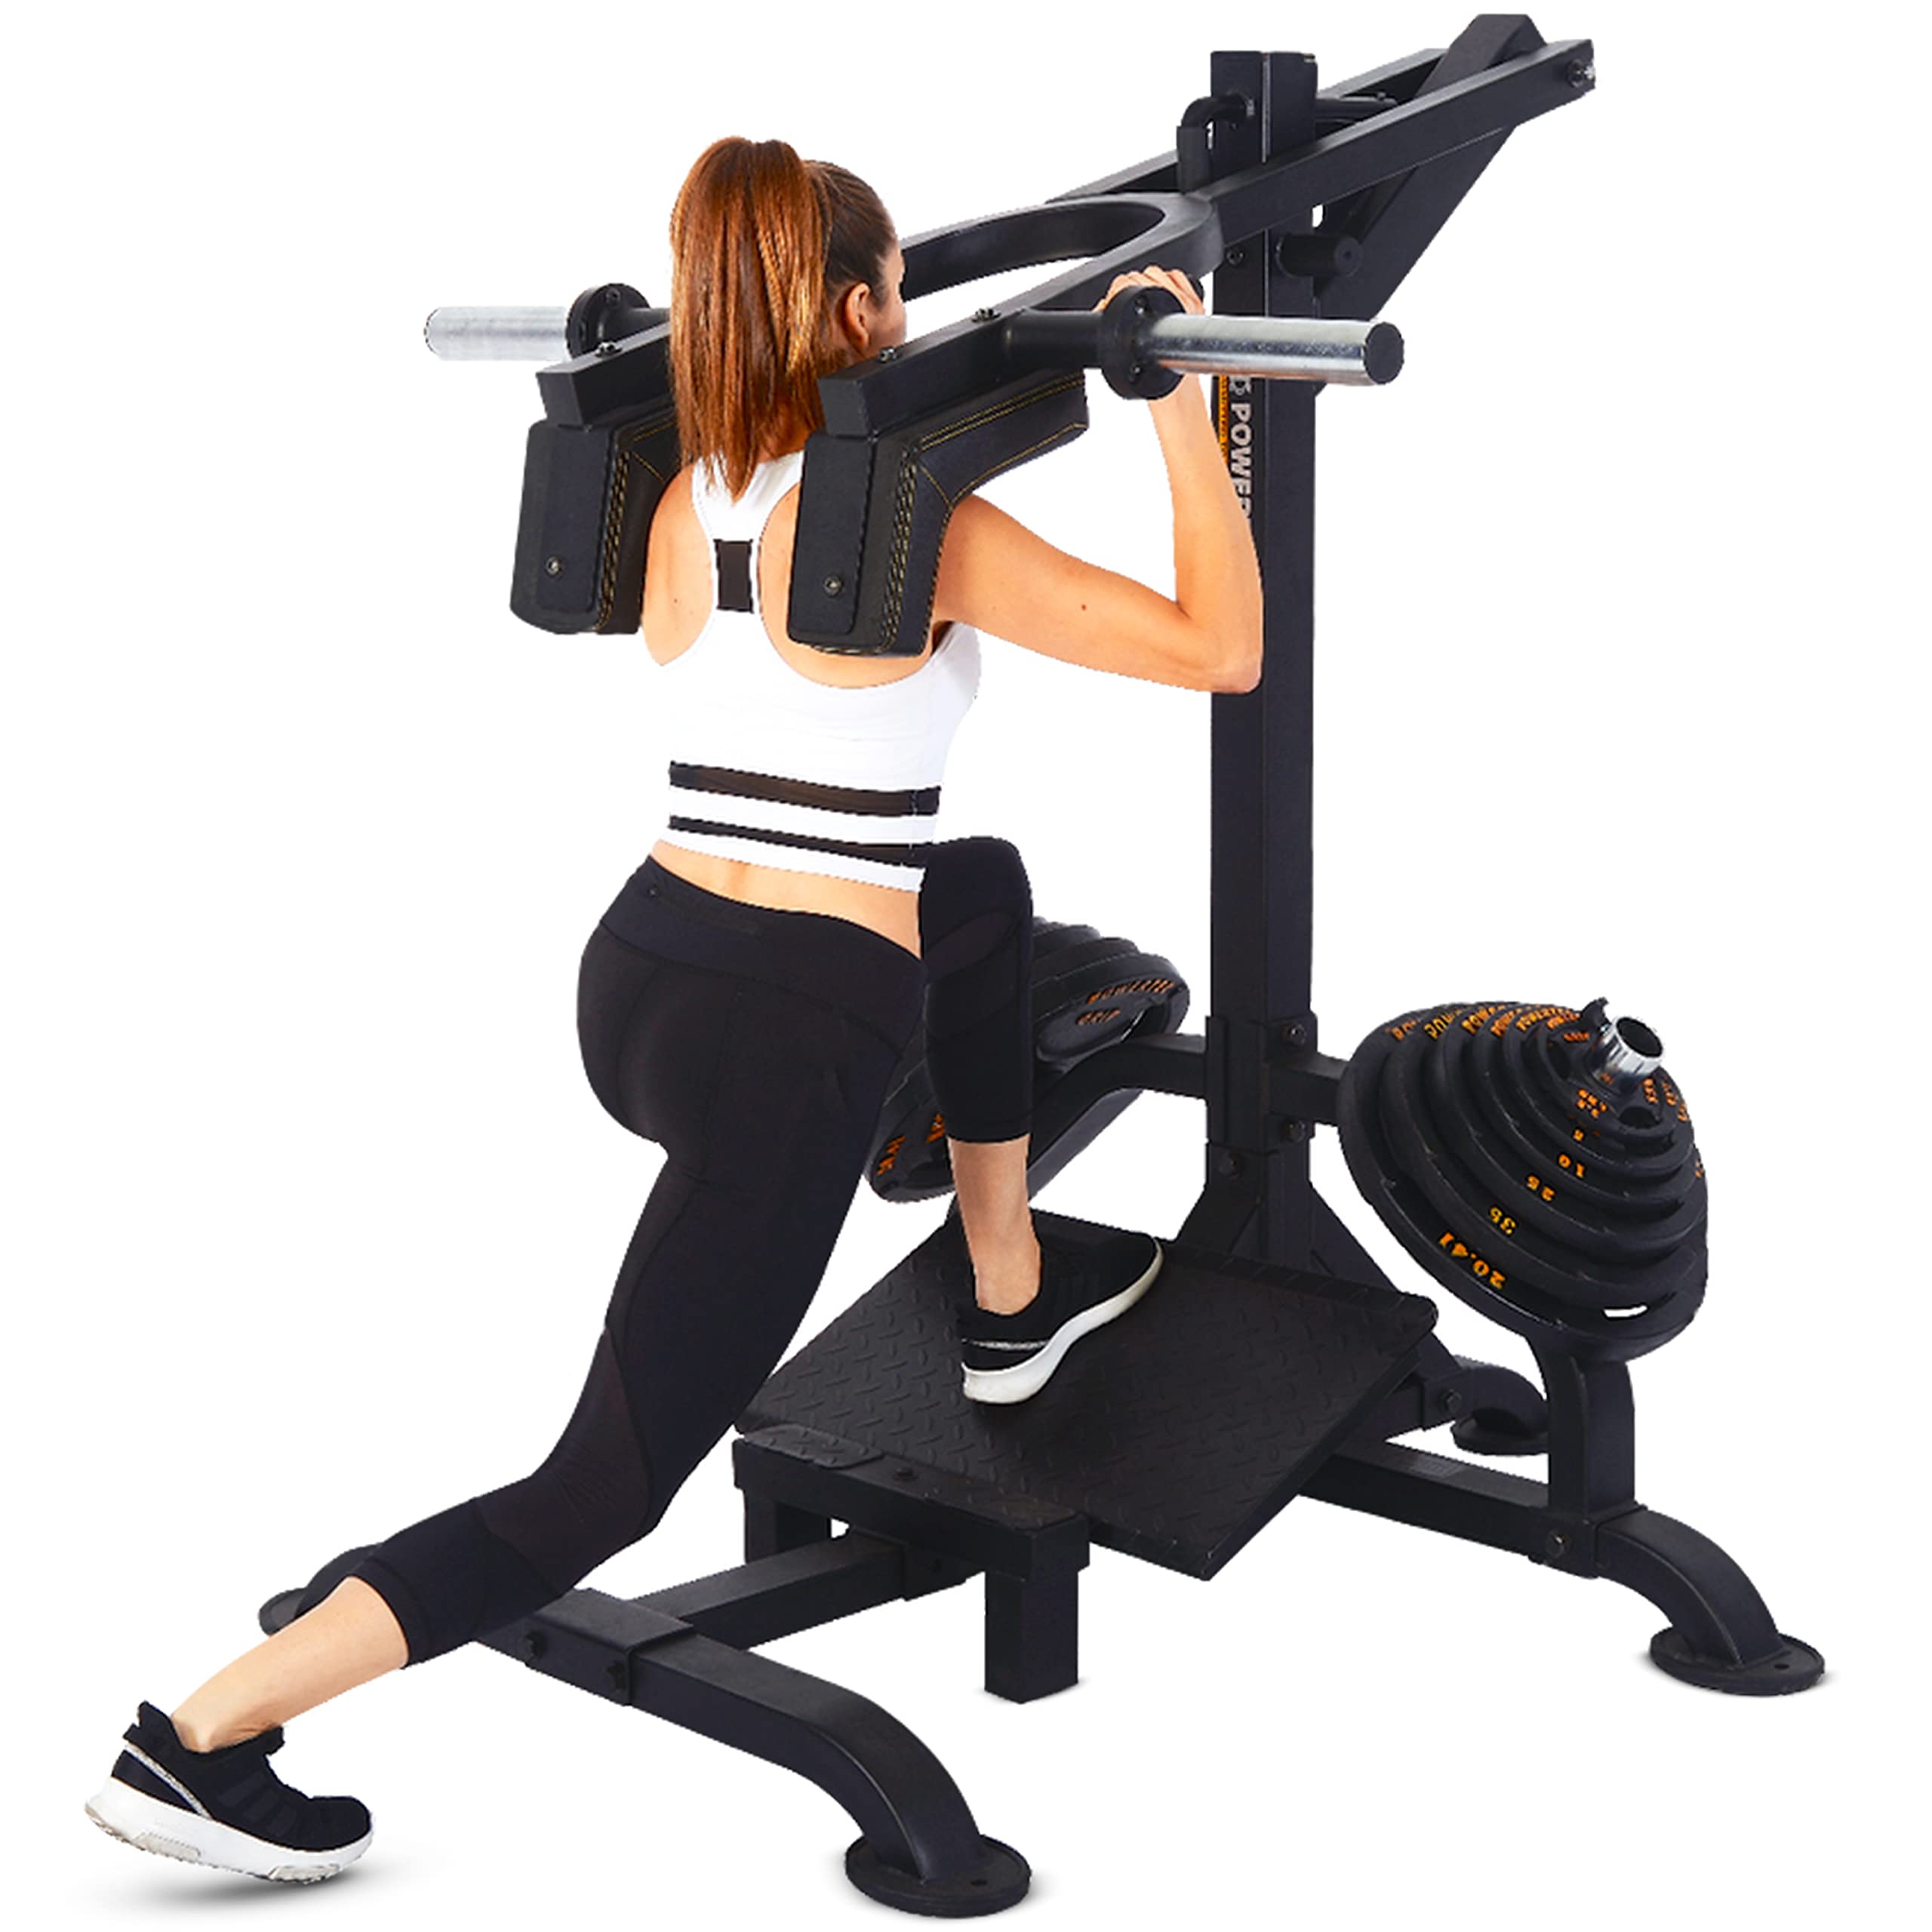 Powertec Fitness Levergym Calf Raise and Squat Machine, Black, 58” x 55” x 61.6”, 500 lbs Max Capacity - High-Quality Weight Training Equipment for Leg Exercise - Premium Home Workout Equipment